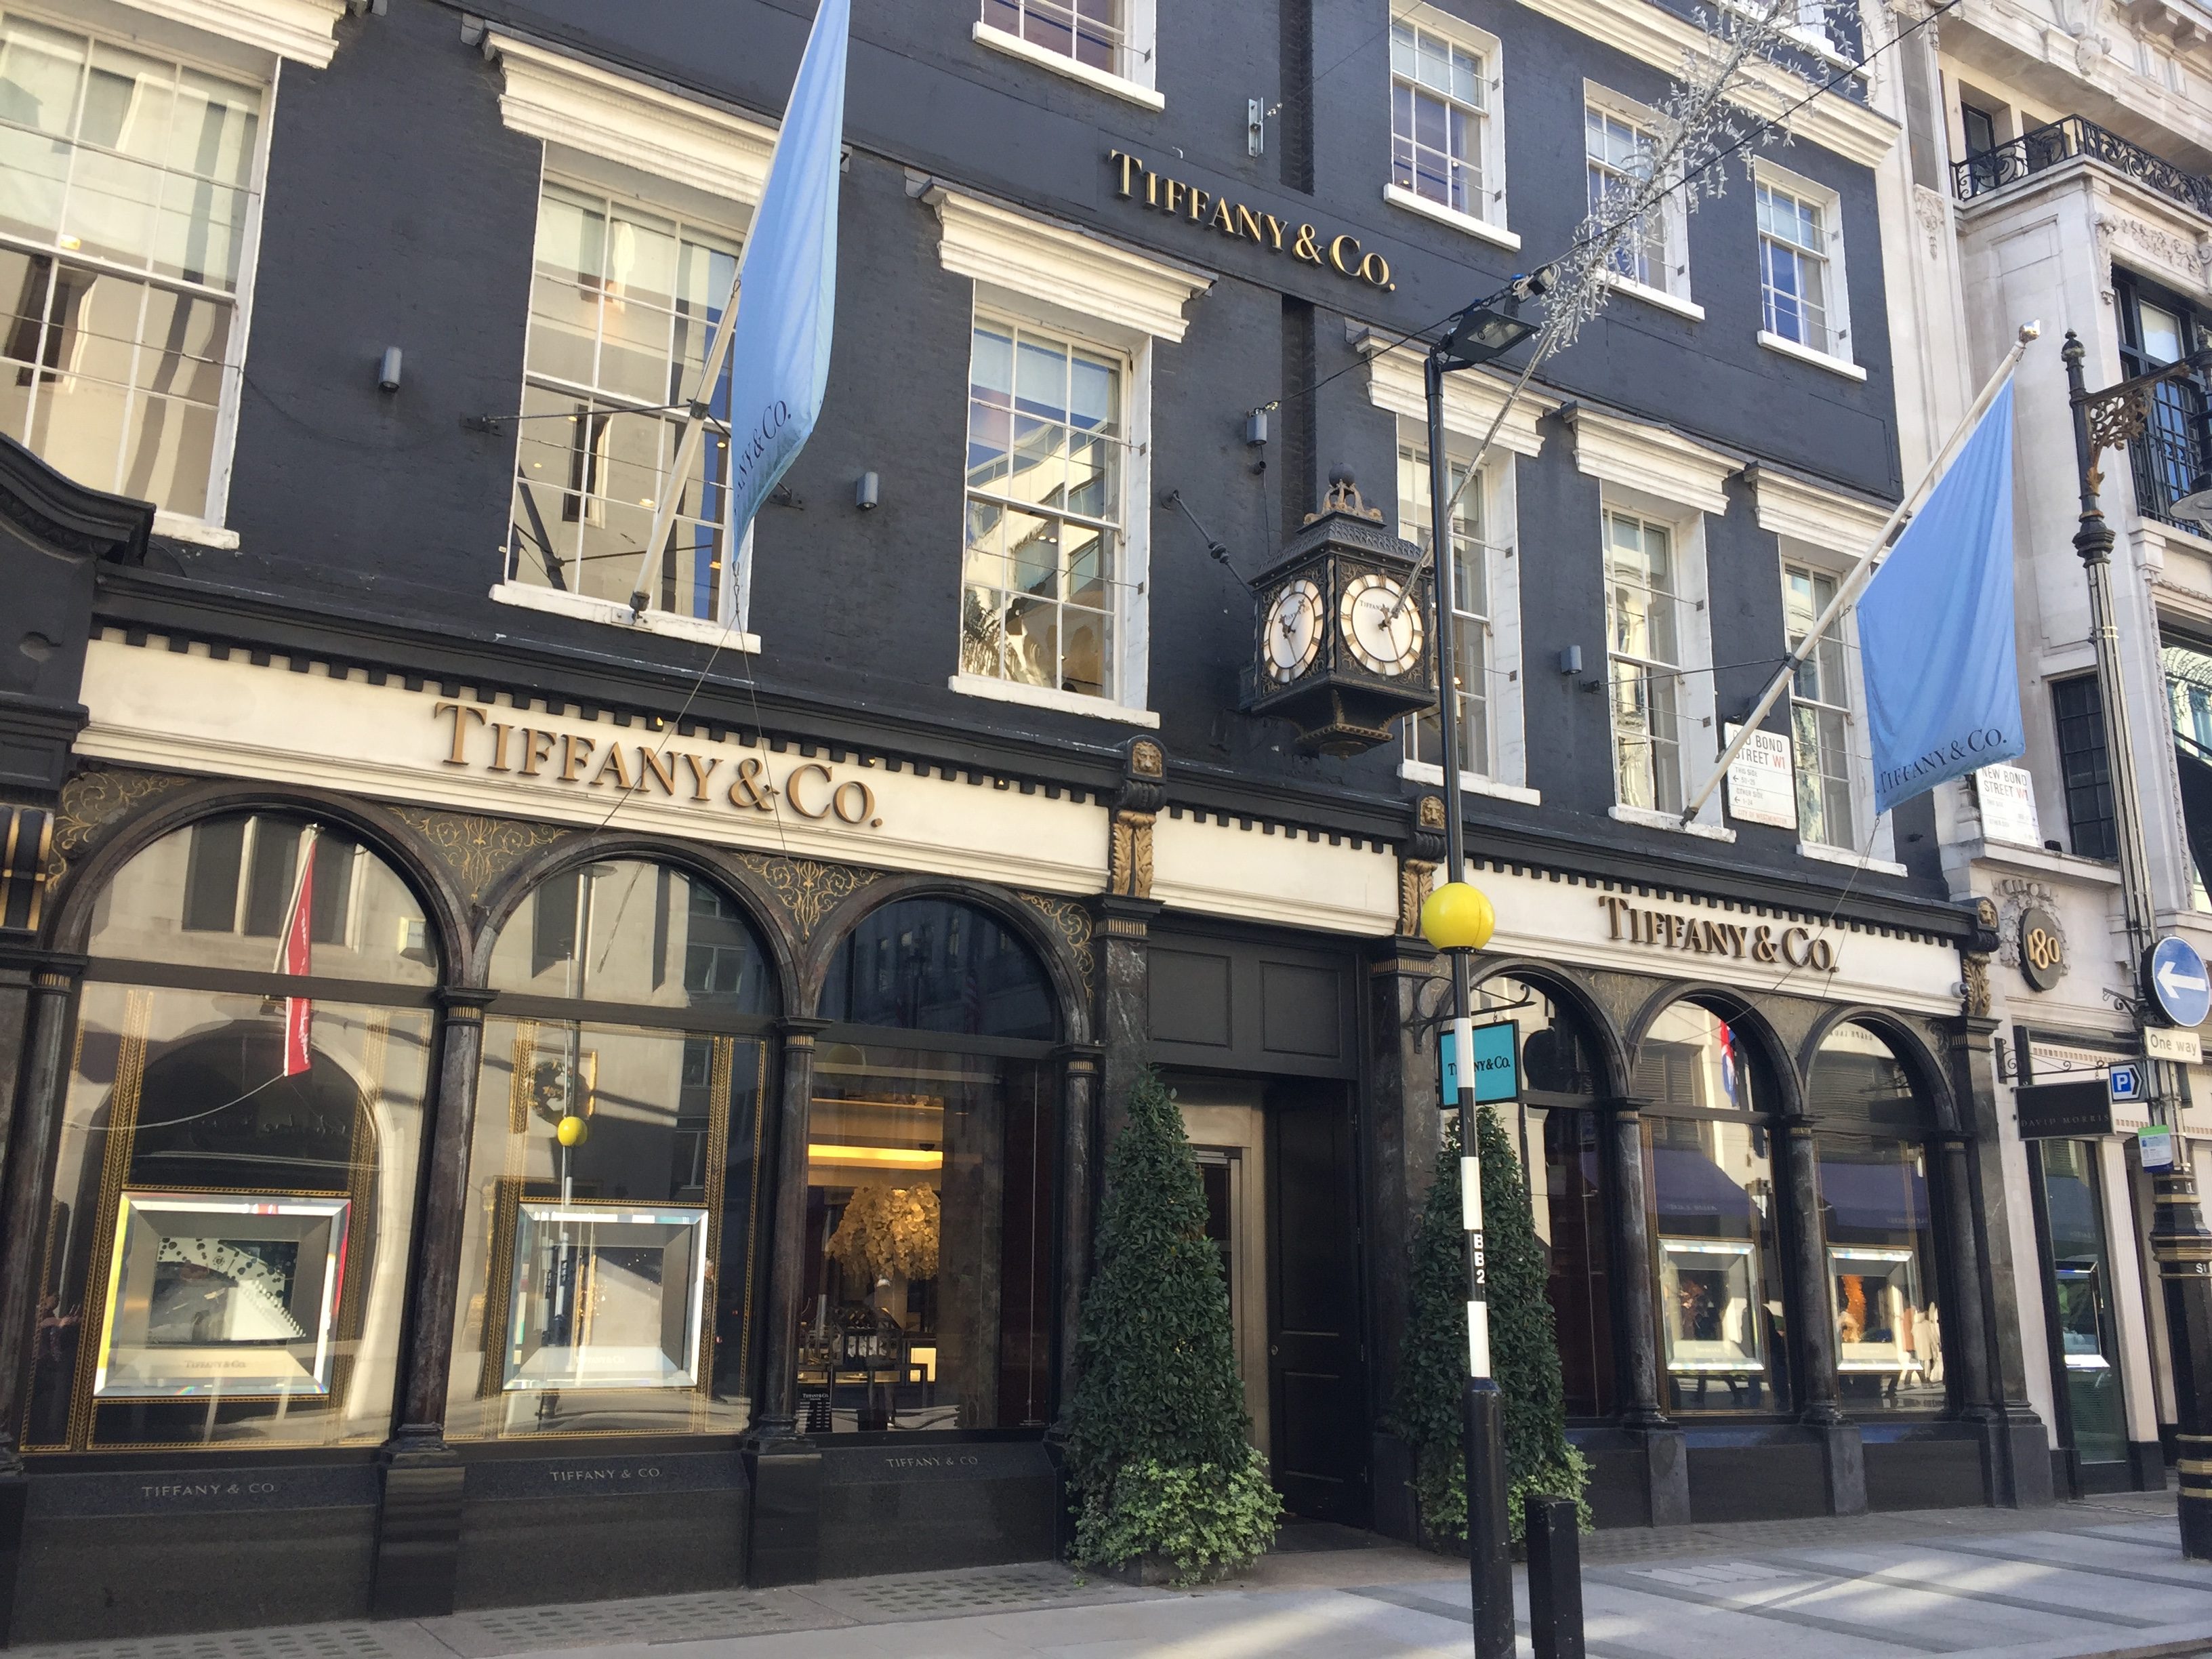 Last Day in London: A Walk Through Ritzy Mayfair – The Conahan Experience